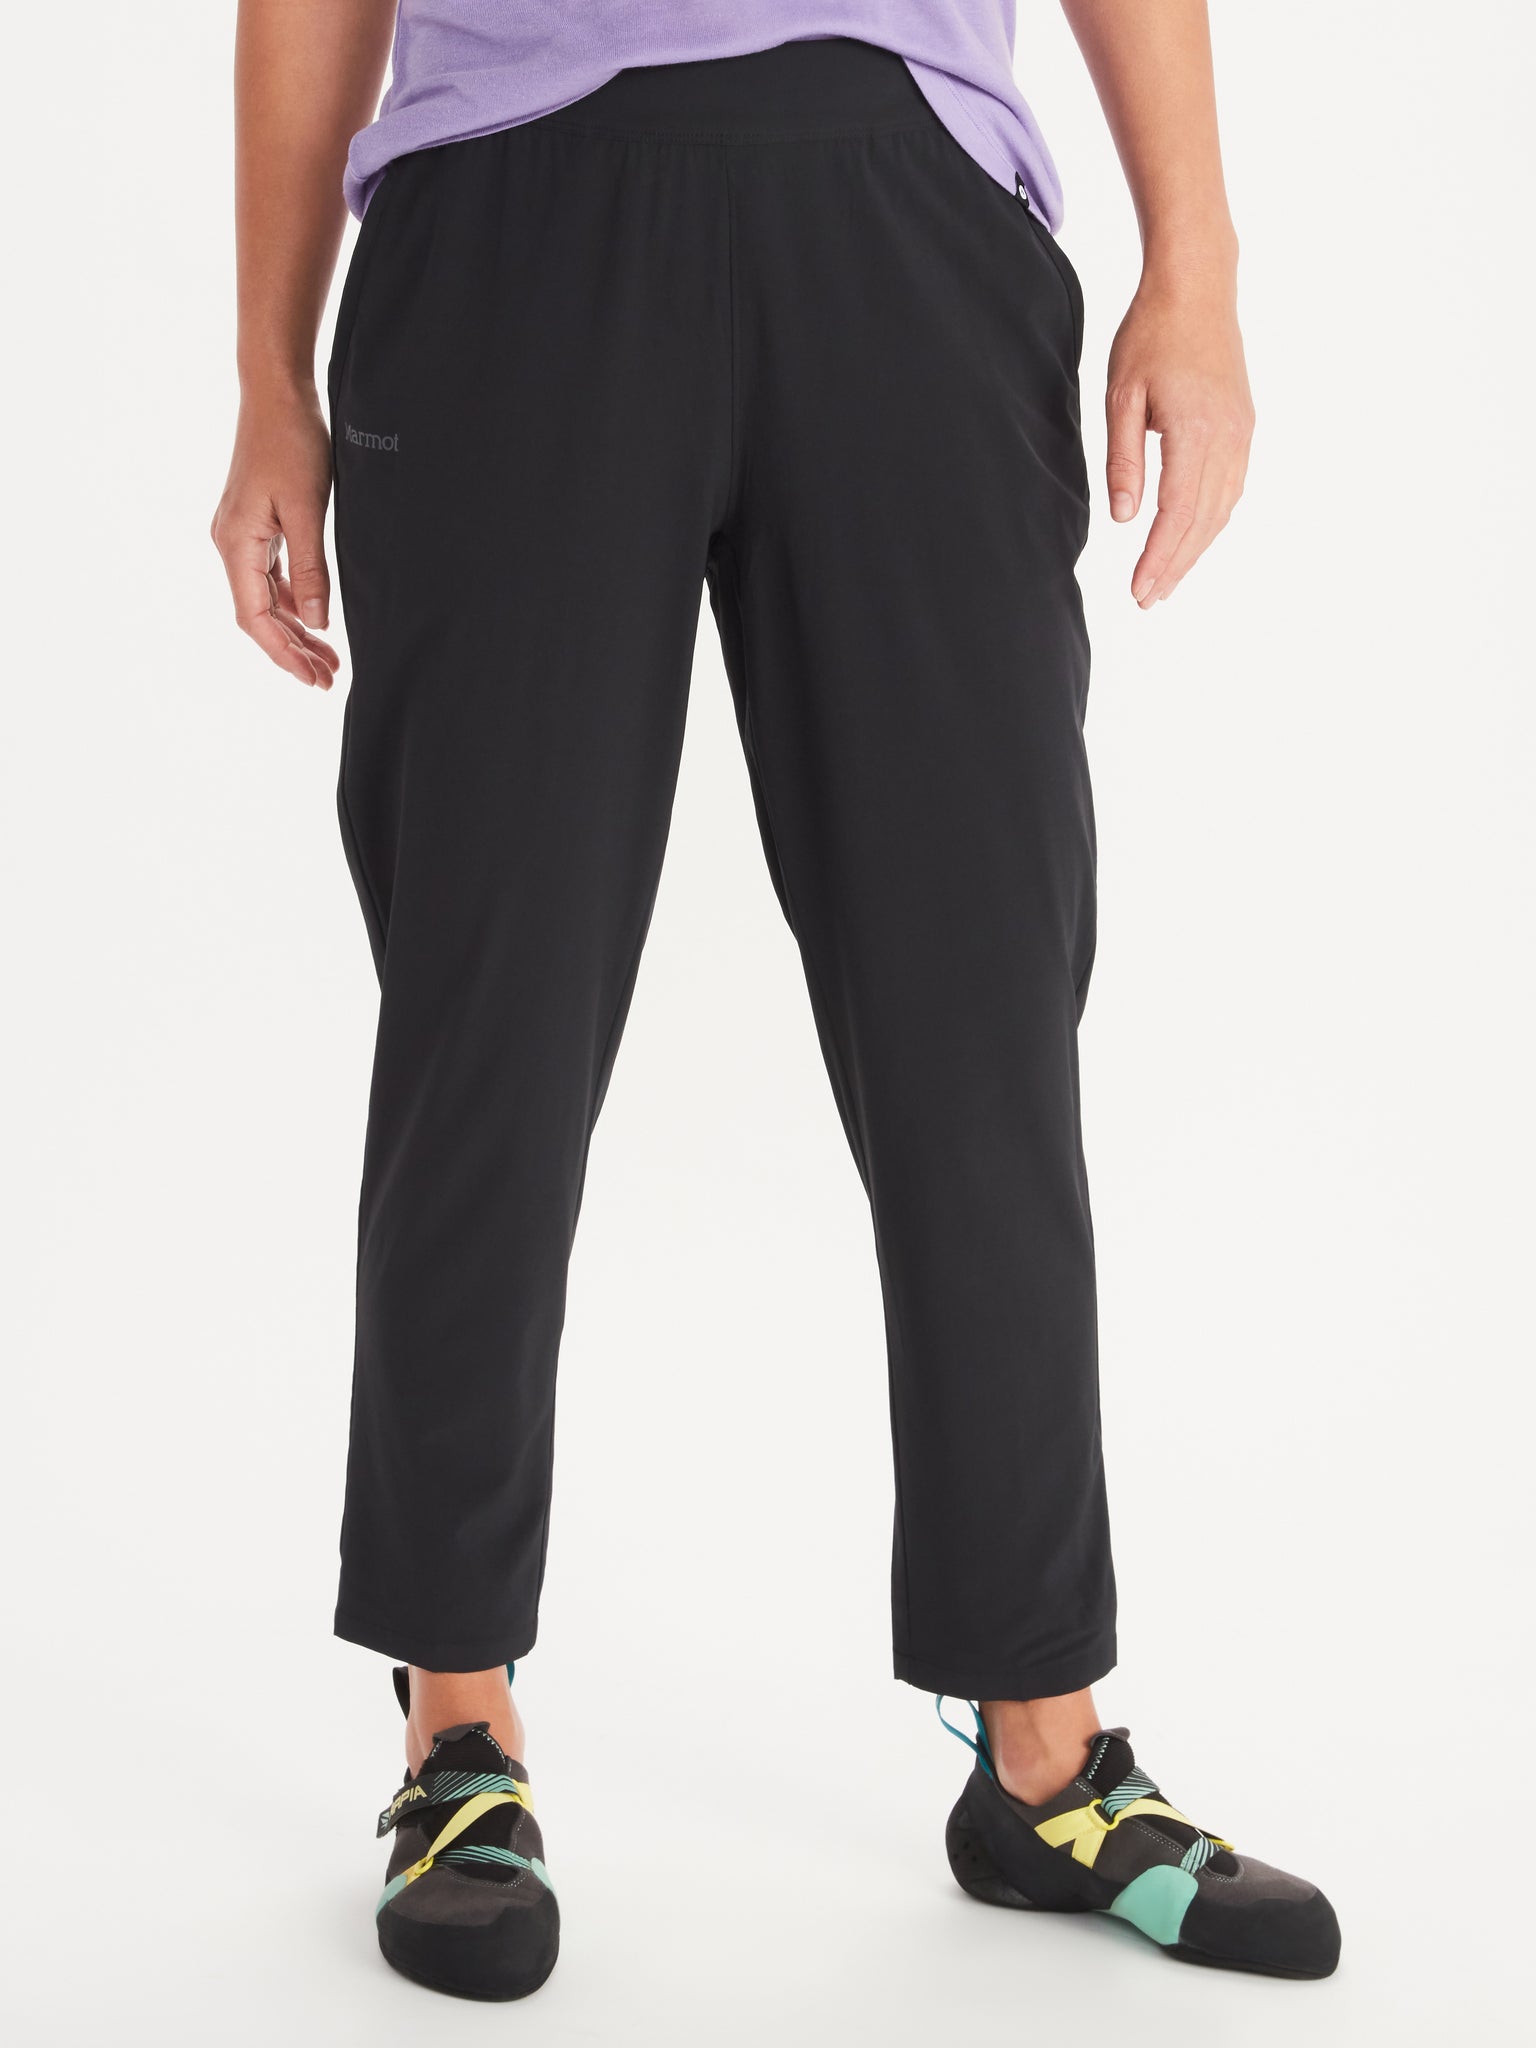 Marmot Mountain Active Pant - Softshell trousers Women's, Buy online